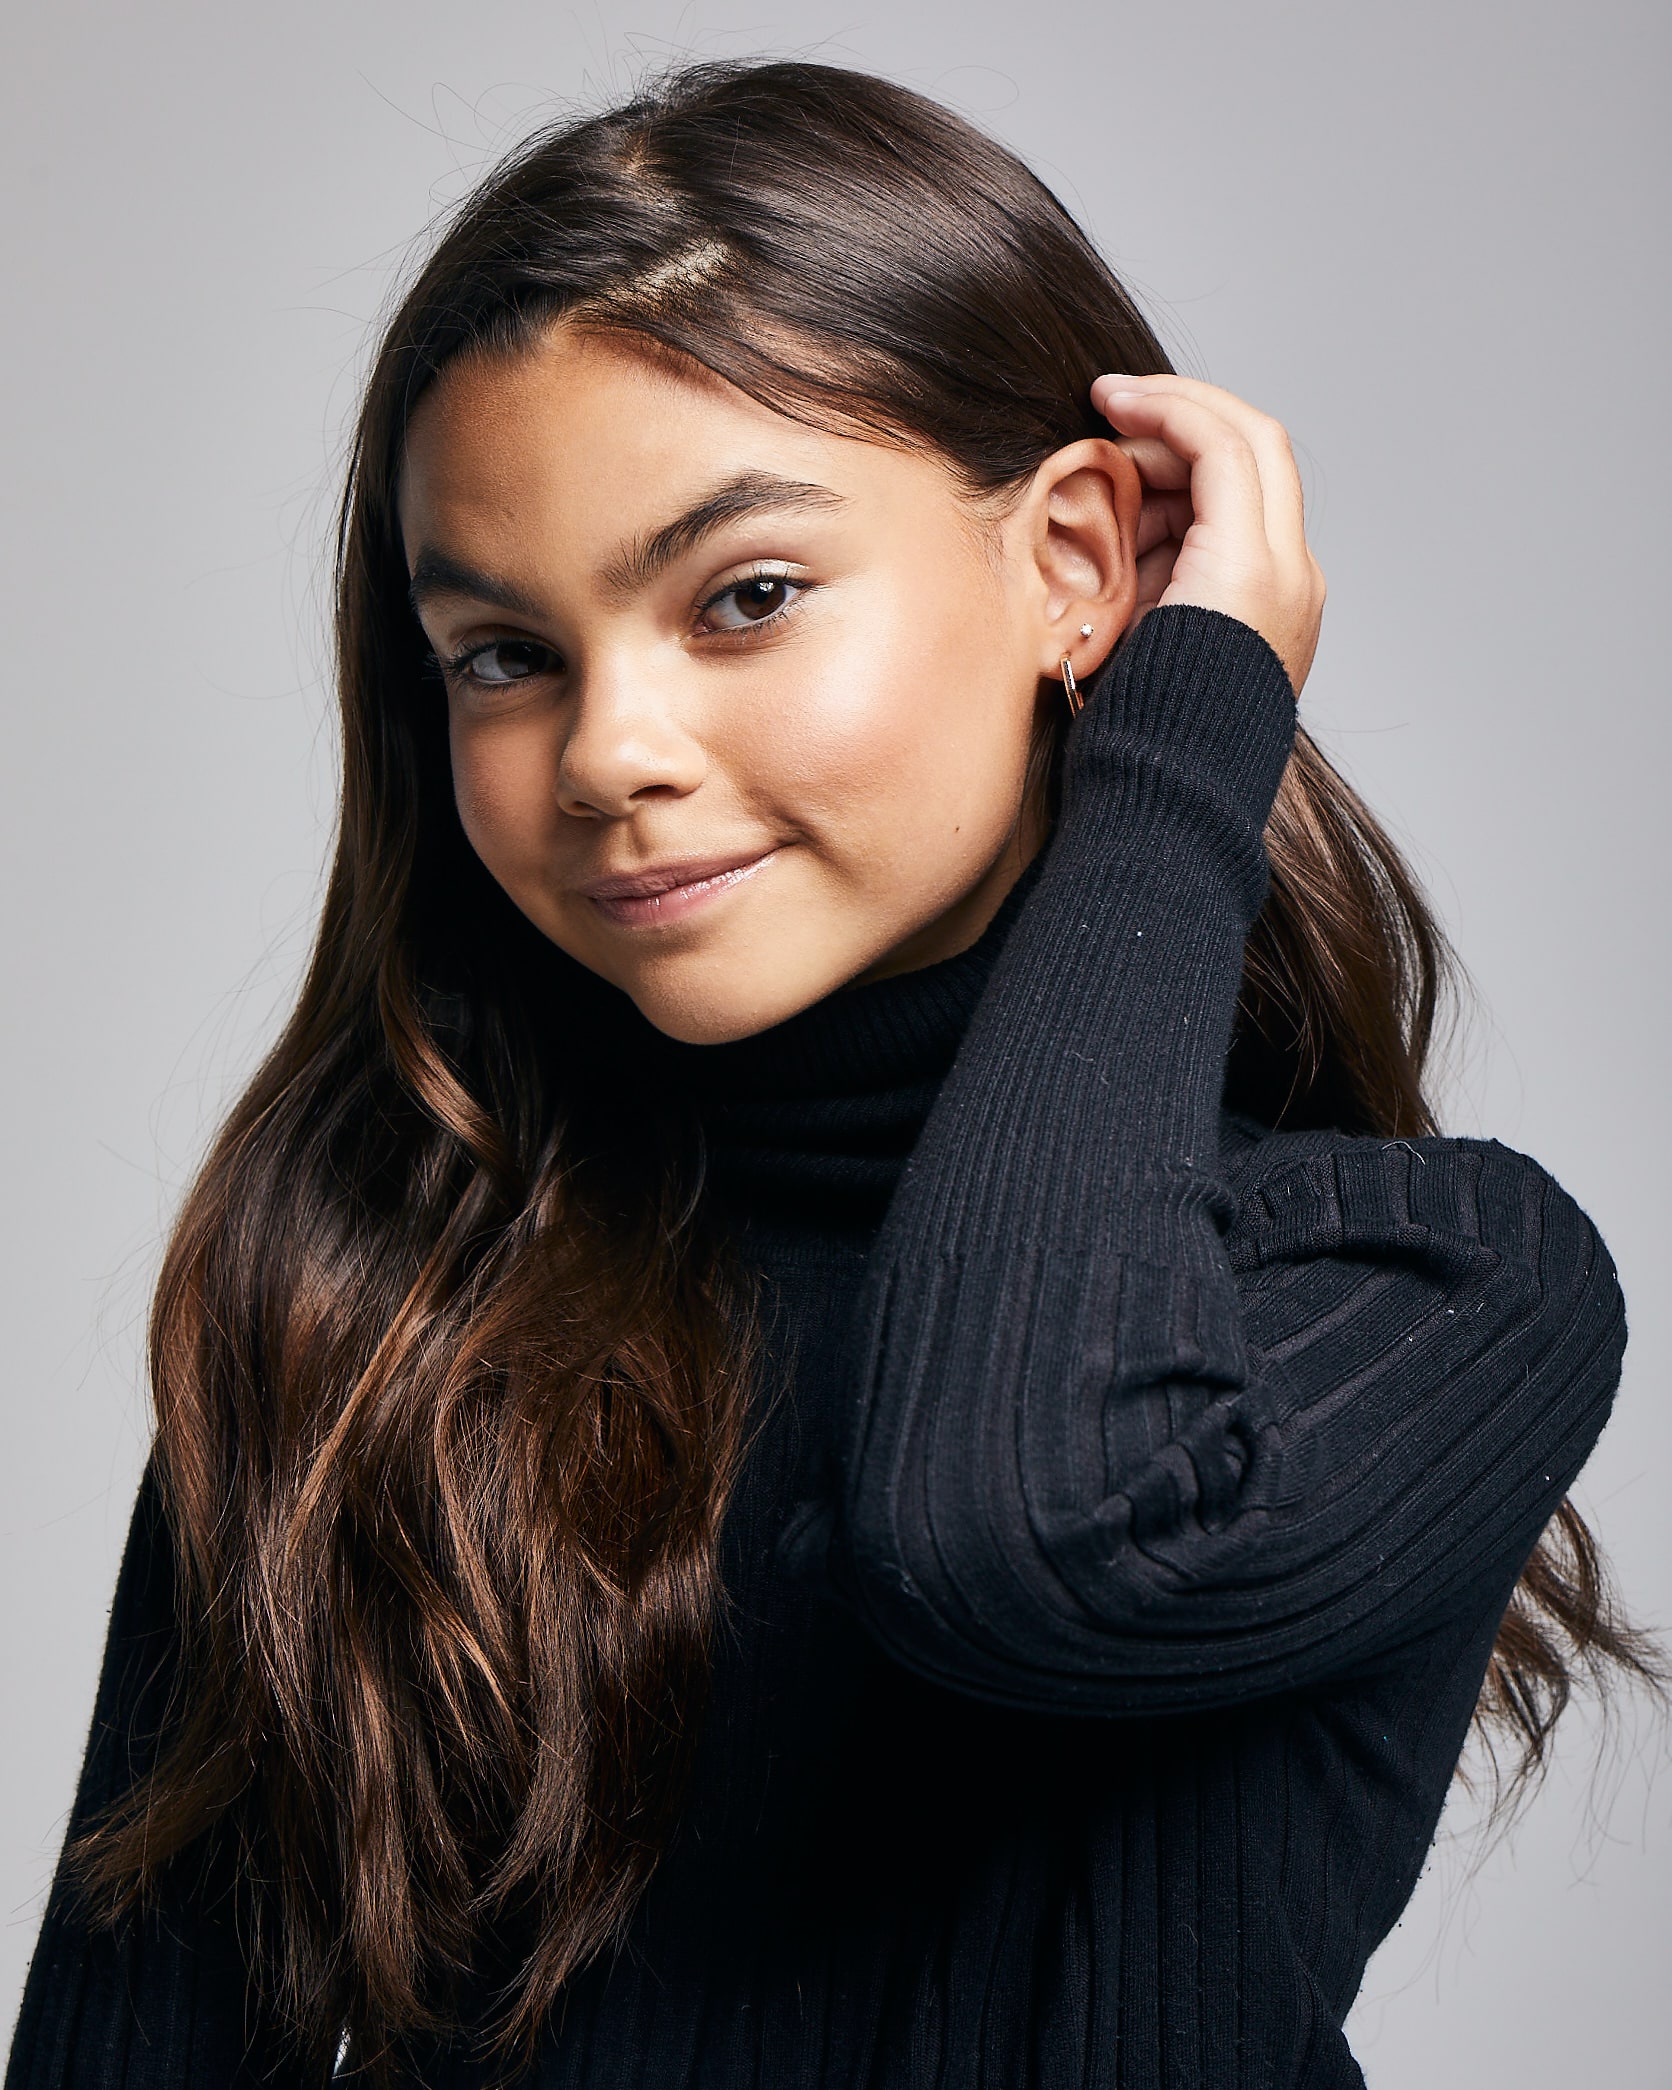 Ariana Greenblatt posing for photograph with her one hand in her hair wearing black sweater 